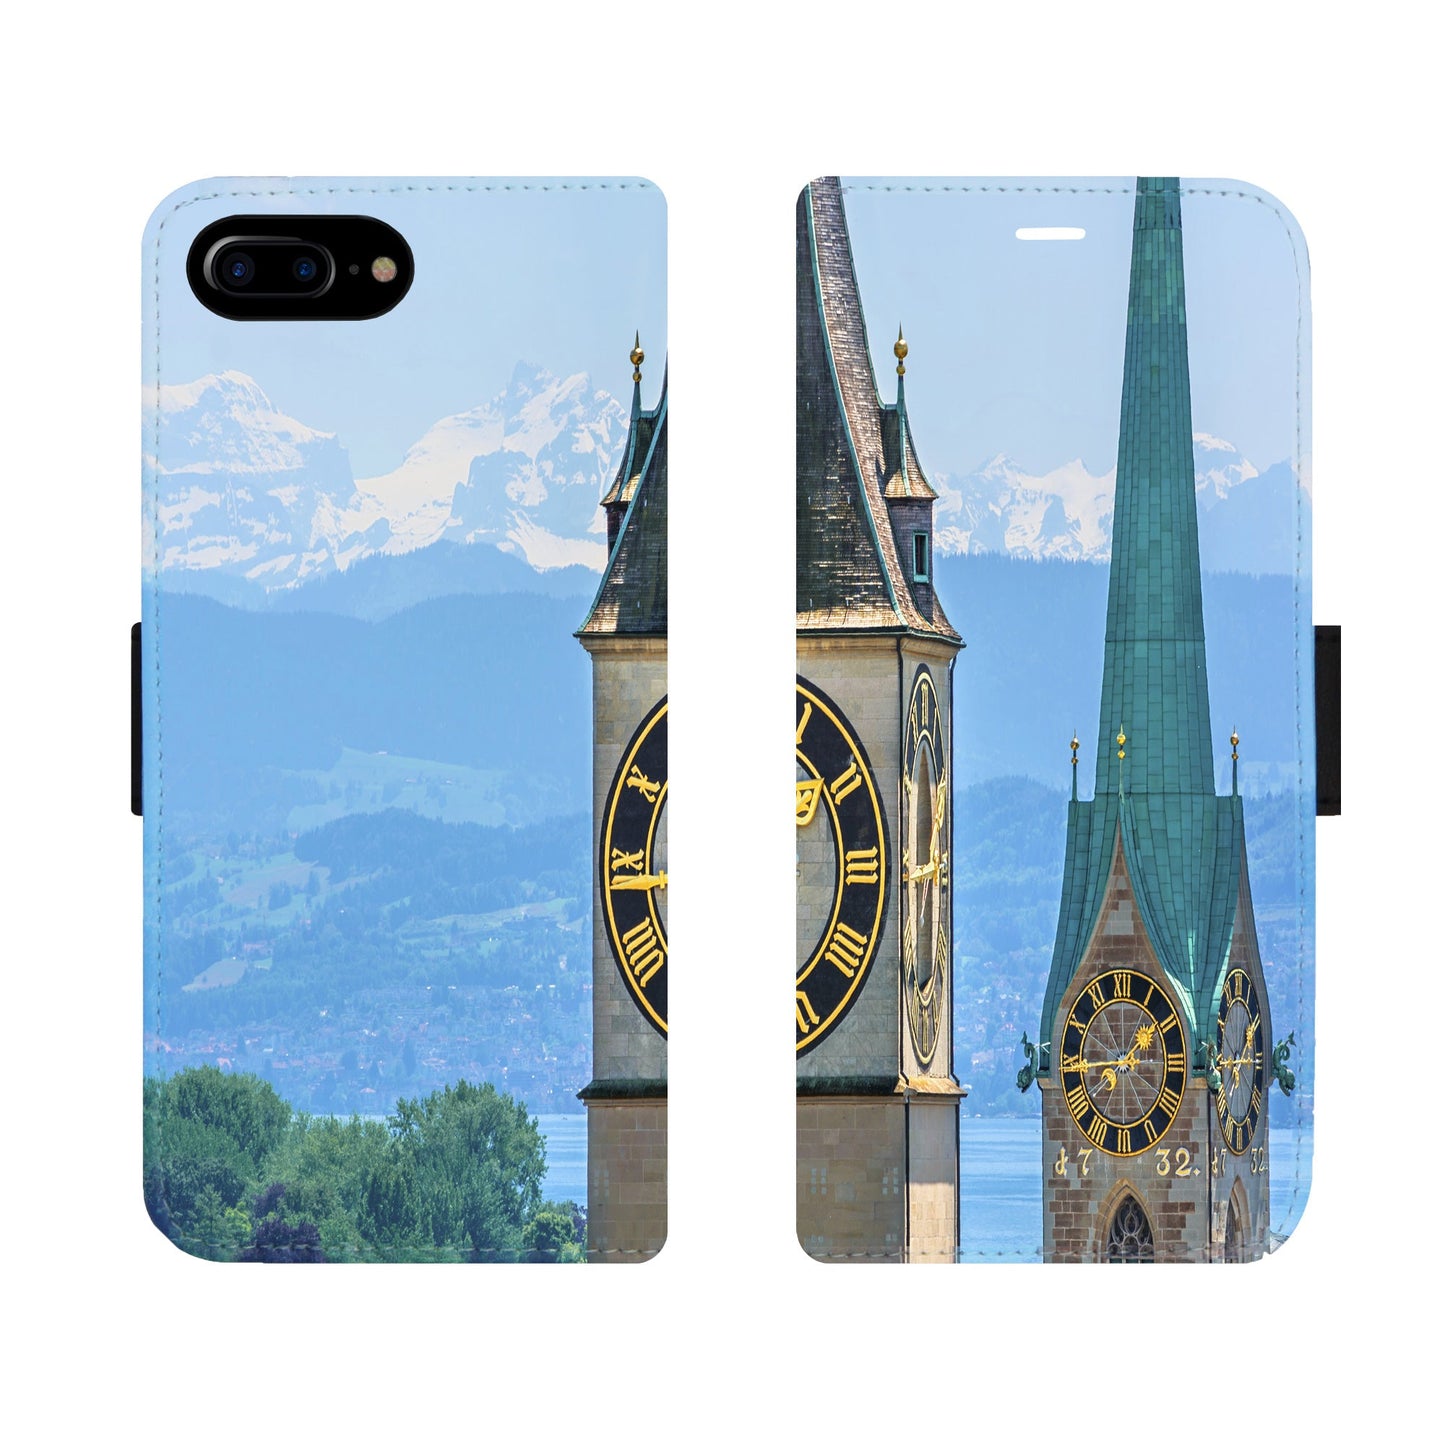 Zurich City St. Peter Fraumünster Victor Case for iPhone 6/6S/7/8 Plus